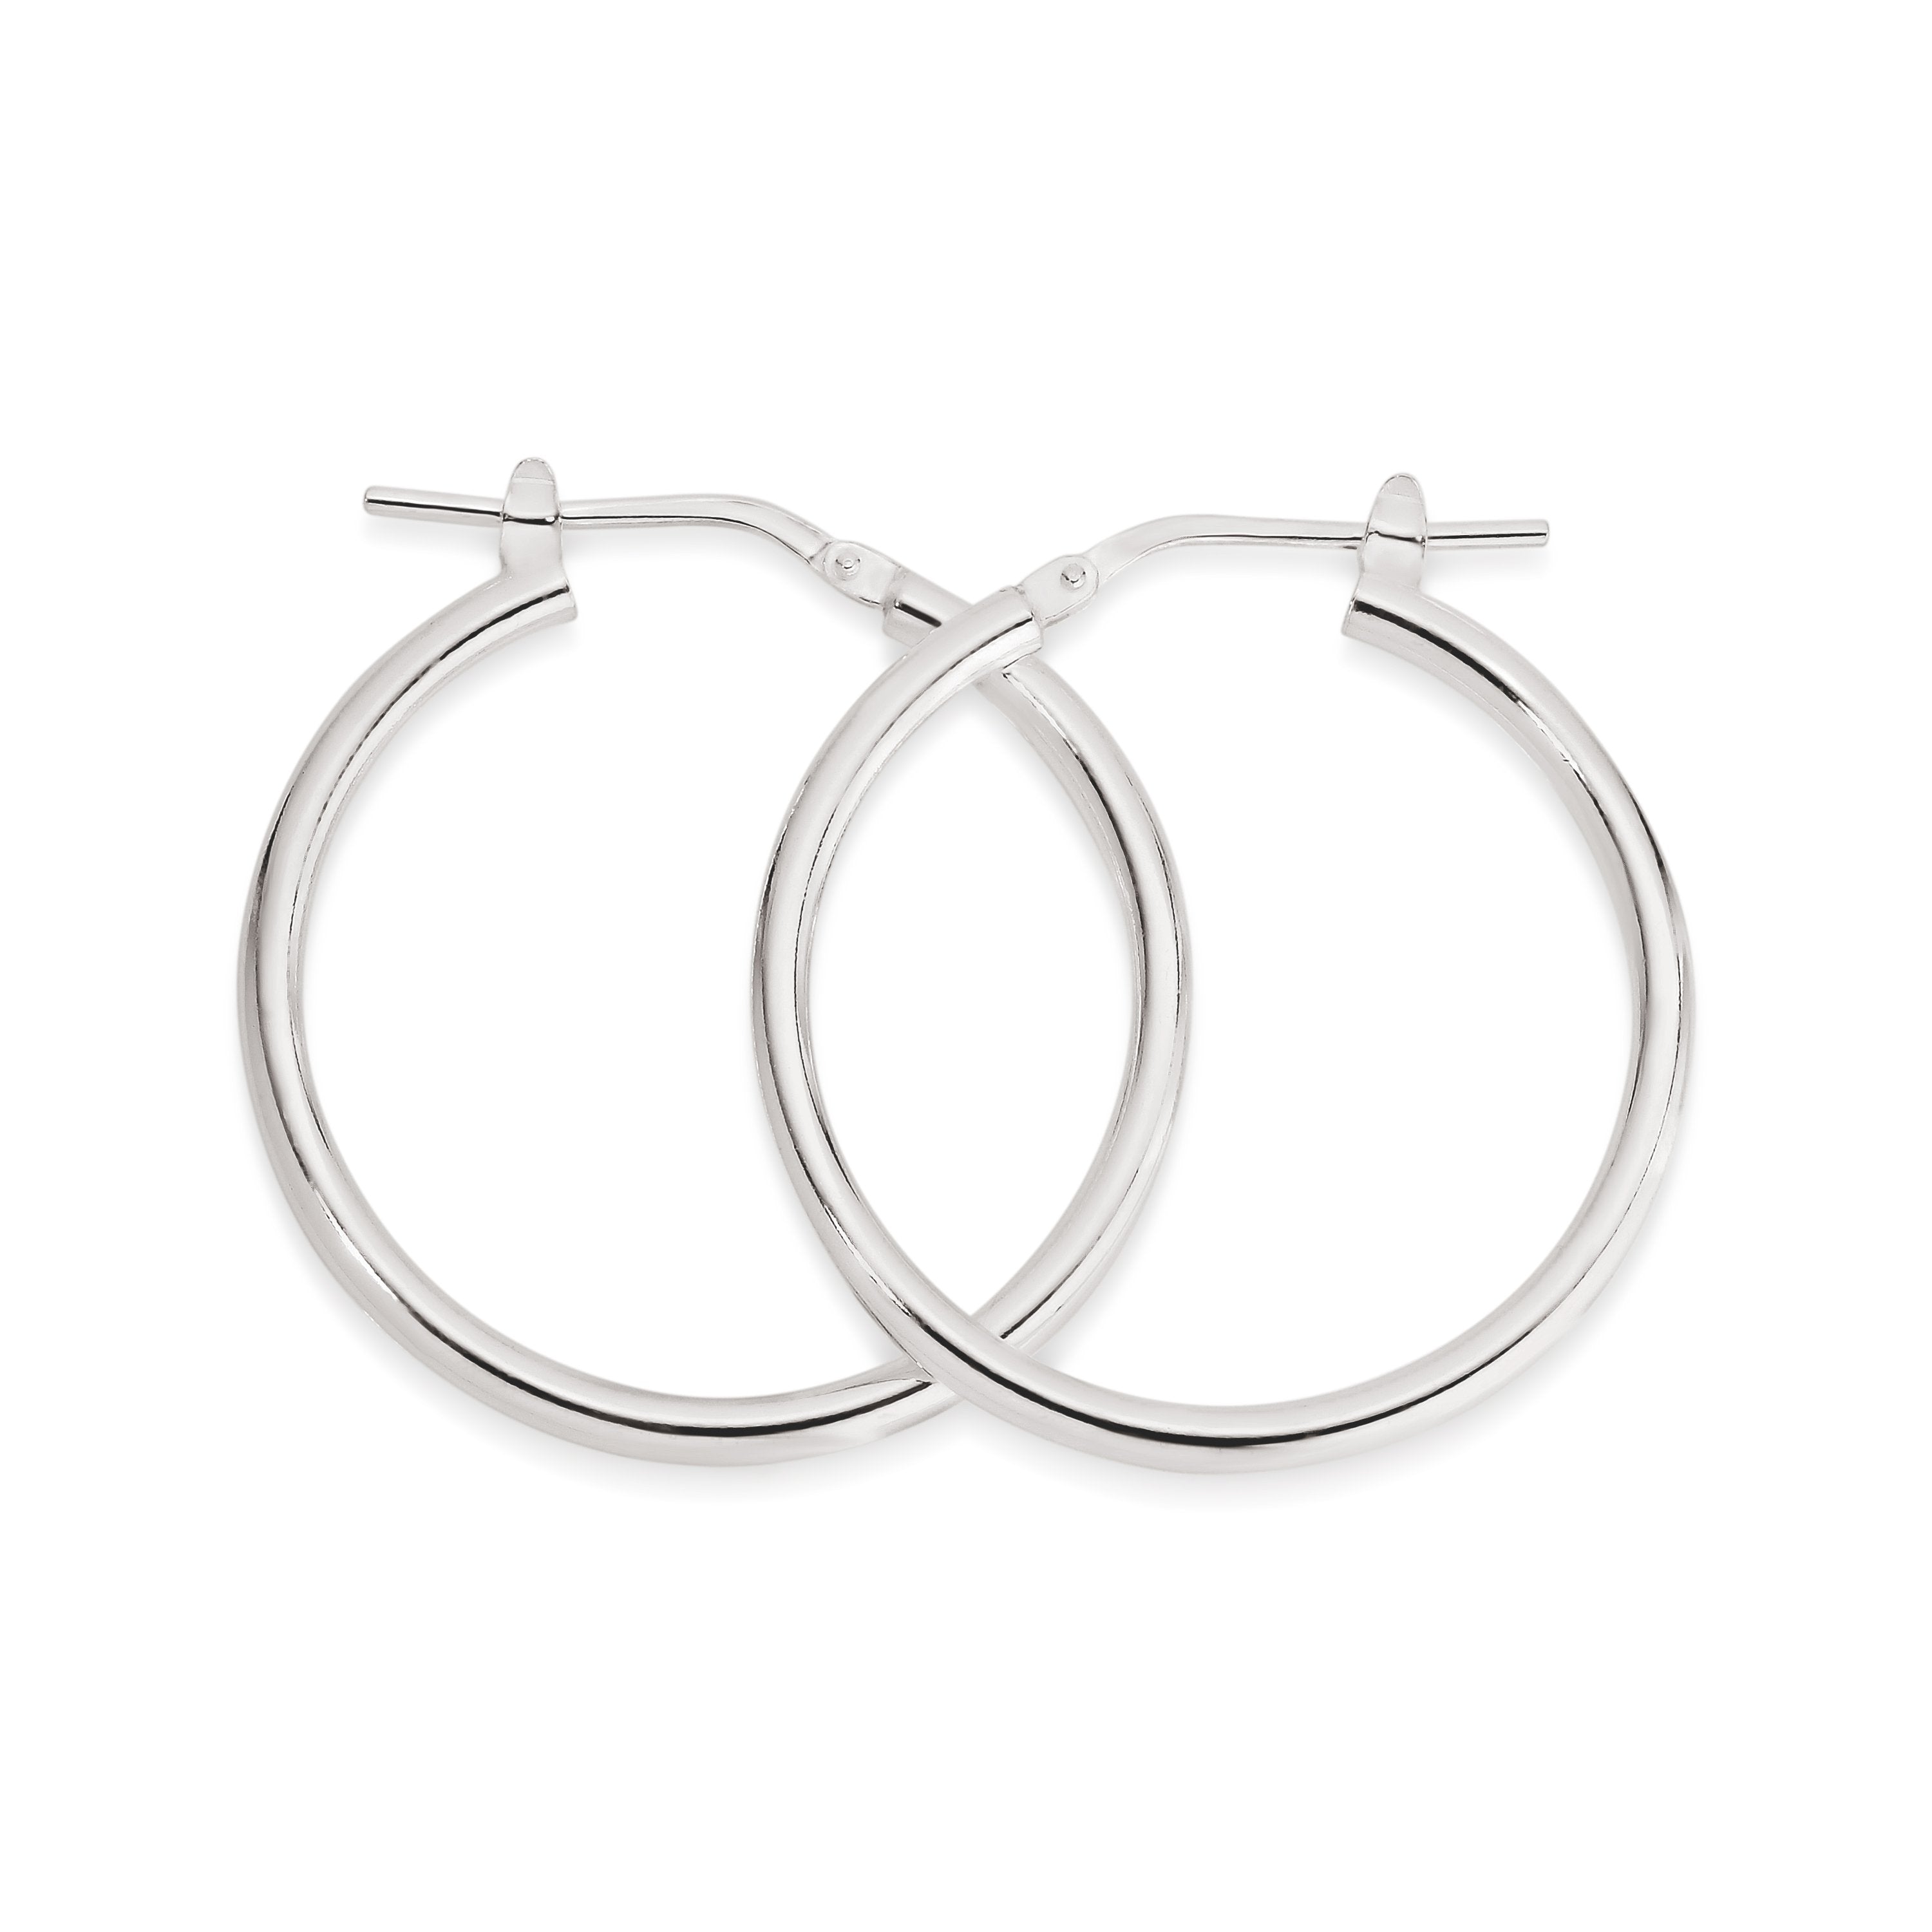 Silver polished hoops 25mm